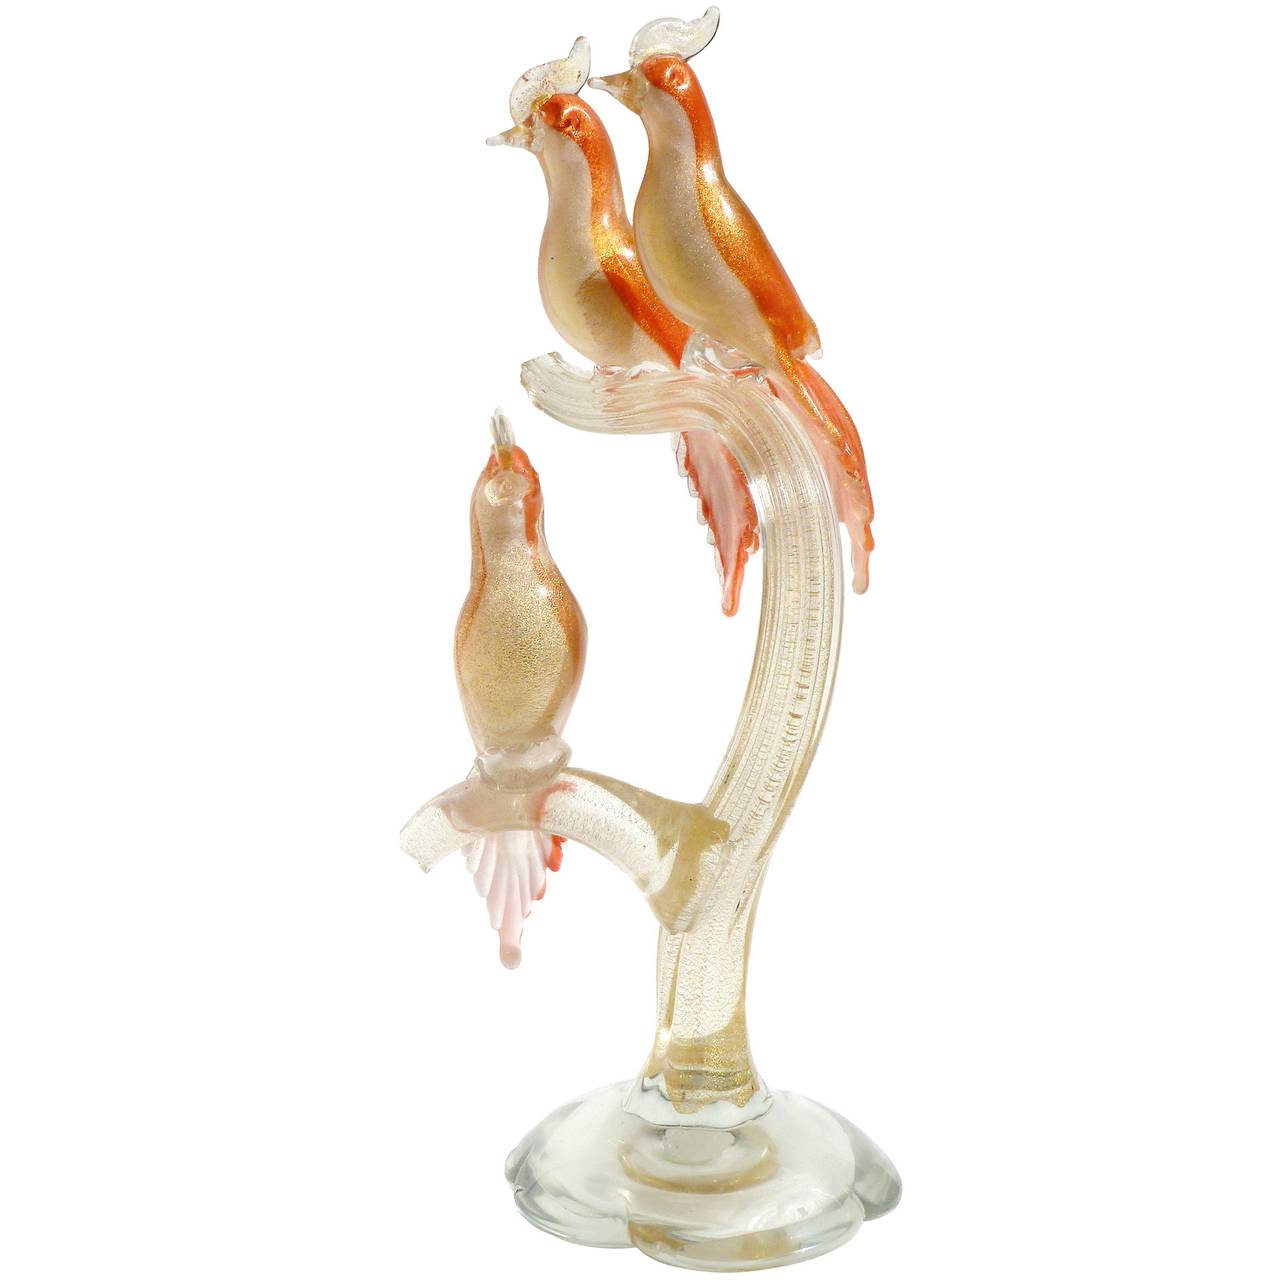 FREE Shipping Worldwide! See details below description.

Rare and Gorgeous Murano Hand Blown Orange, White and Gold Flecks 3 Birds on a Tree Art Glass Sculpture. Attributed to designer Alfredo Barbini, circa 1950s, with original label. The label